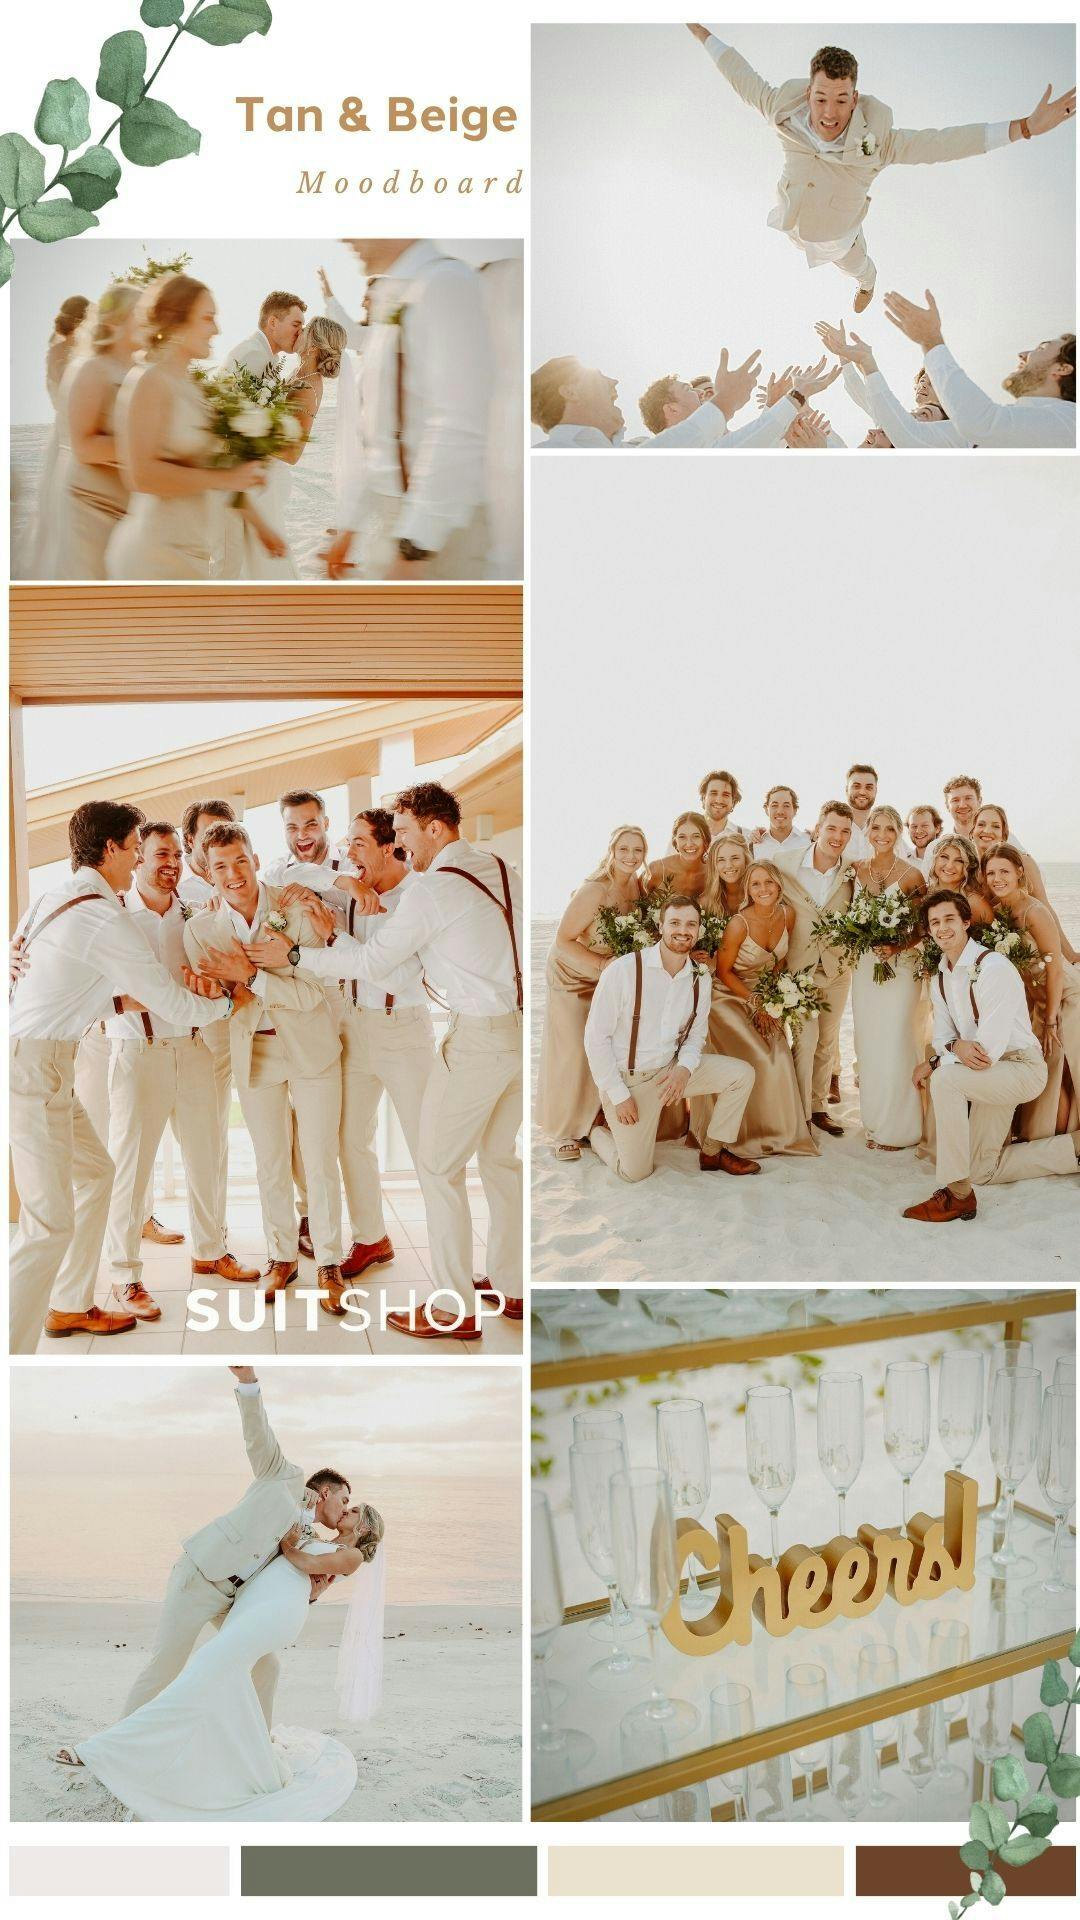 Neutral wedding mood board with tan and beige bridal party style, suits, suspenders on the beach.